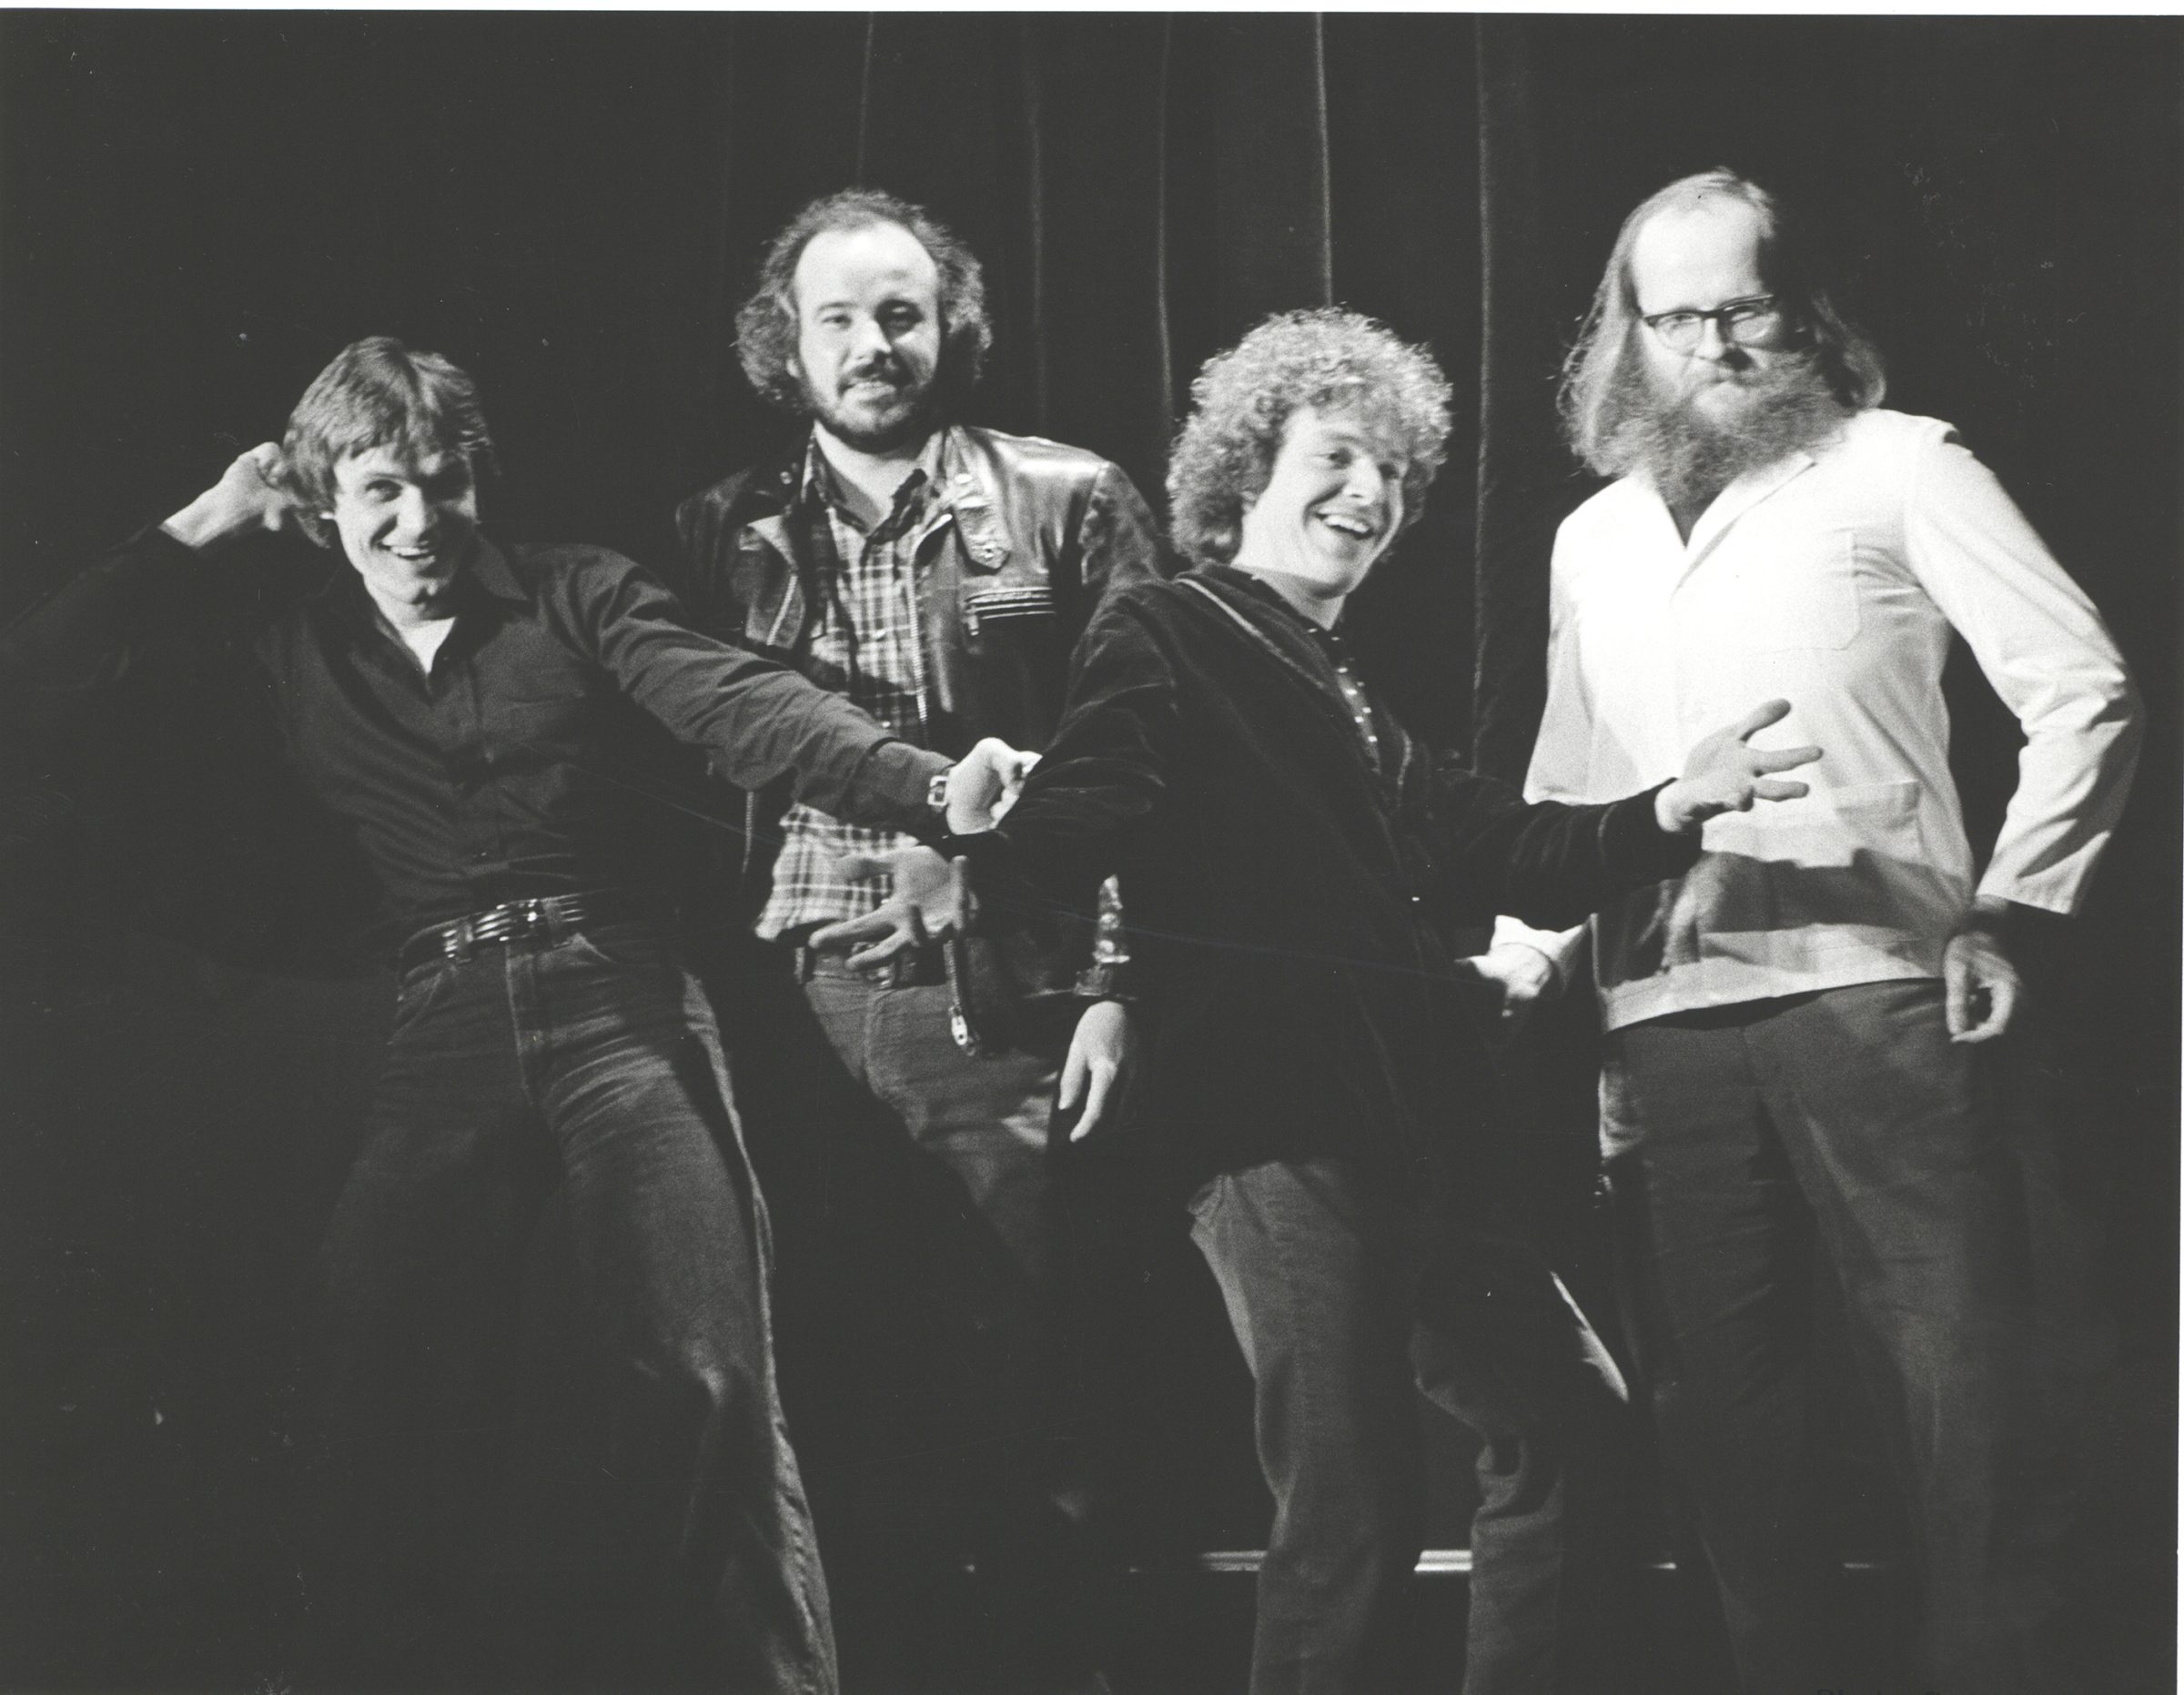 A black and white photo of four people. The first is wearing a black collared shirt and jeans, the second a plaif shirt under a leather jacket and jeans, the third a black coat and jeans, and the fourth has a large beard and glasses and is wearing a white shirt and jeans. The first person is pusing on the third persons arm. Everyone is smiling.